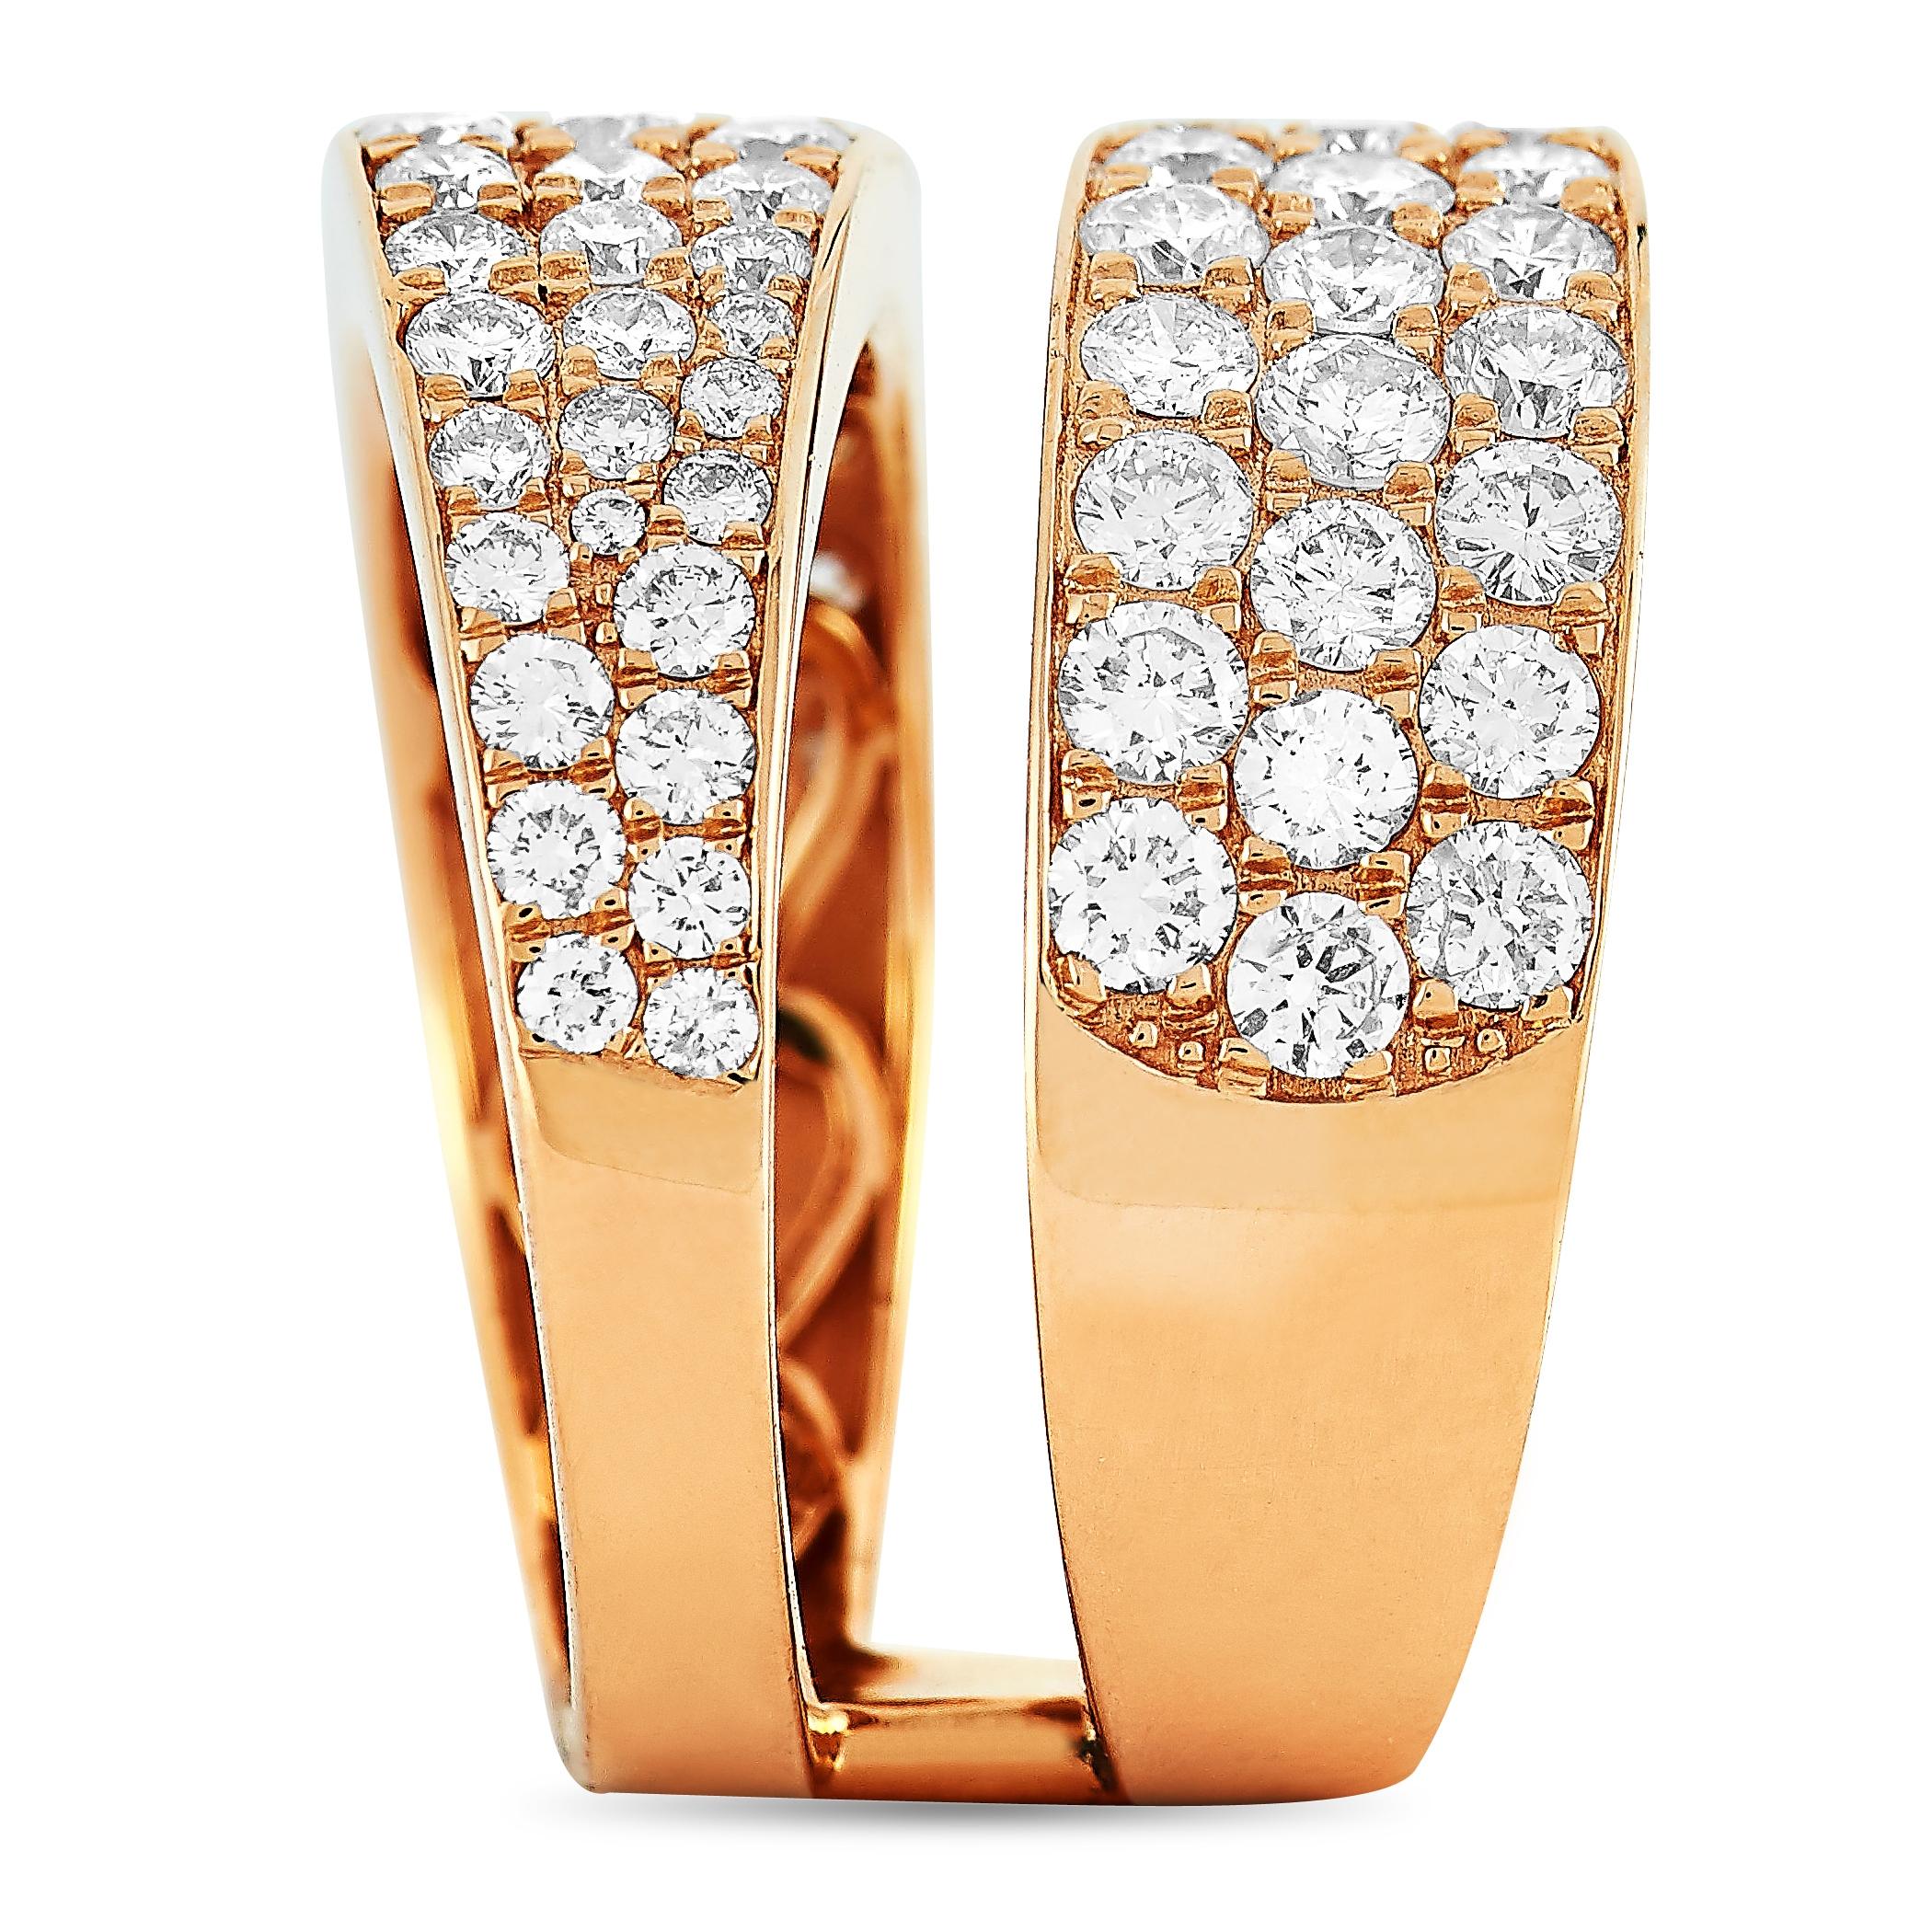 This LB Exclusive ring is made of 18K rose gold and embellished with diamonds that amount to 2.50 carats. The ring weighs 9.4 grams and boasts band thickness of 10 mm and top height of 2 mm, while top dimensions measure 20 by 15 mm.
 
 Offered in